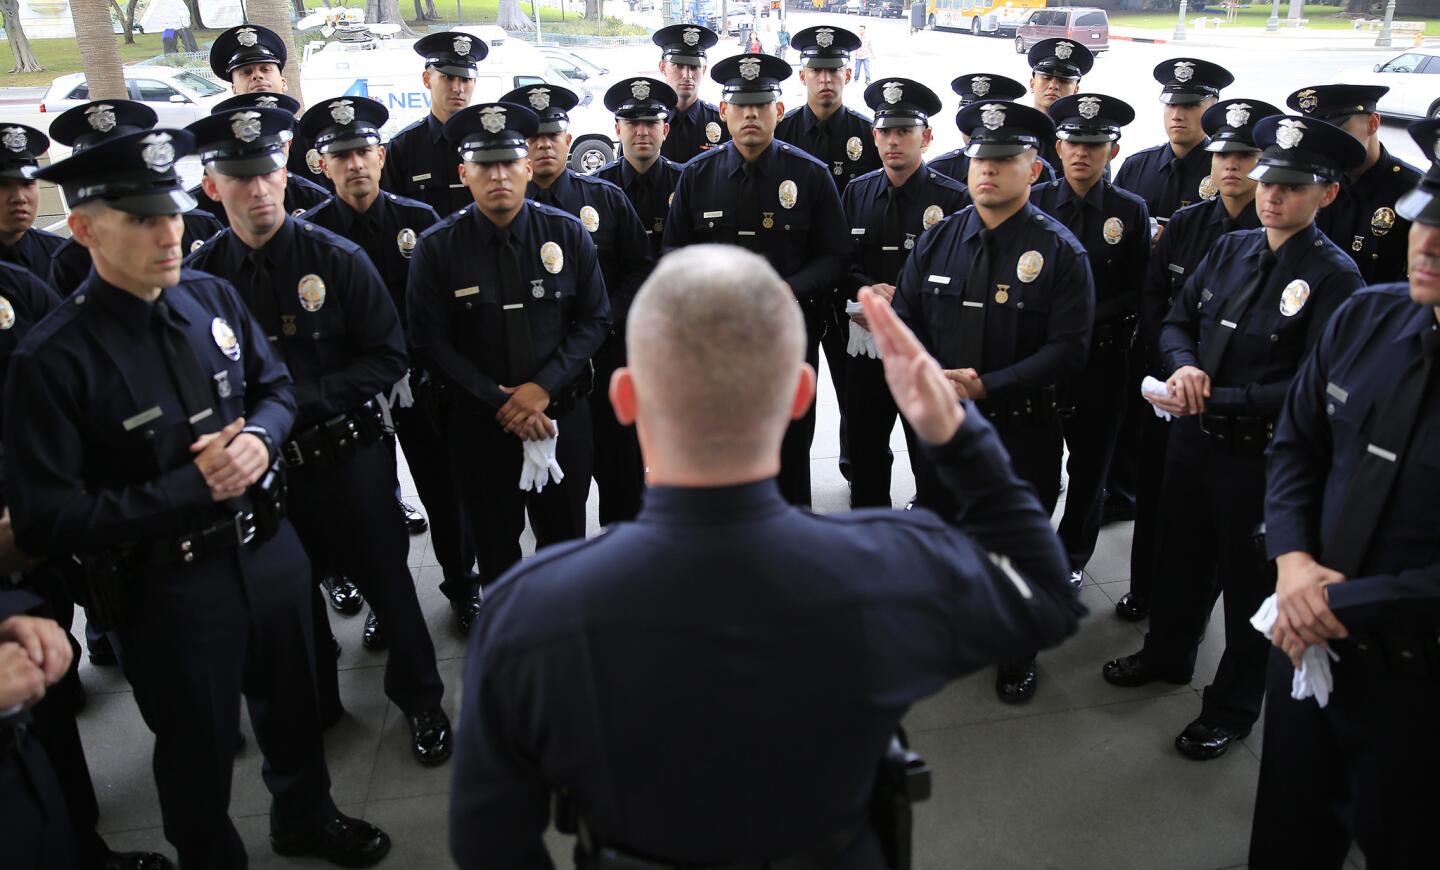 Drill instructor Adam Gross talks to LAPD officer recruits before their graduation in February.